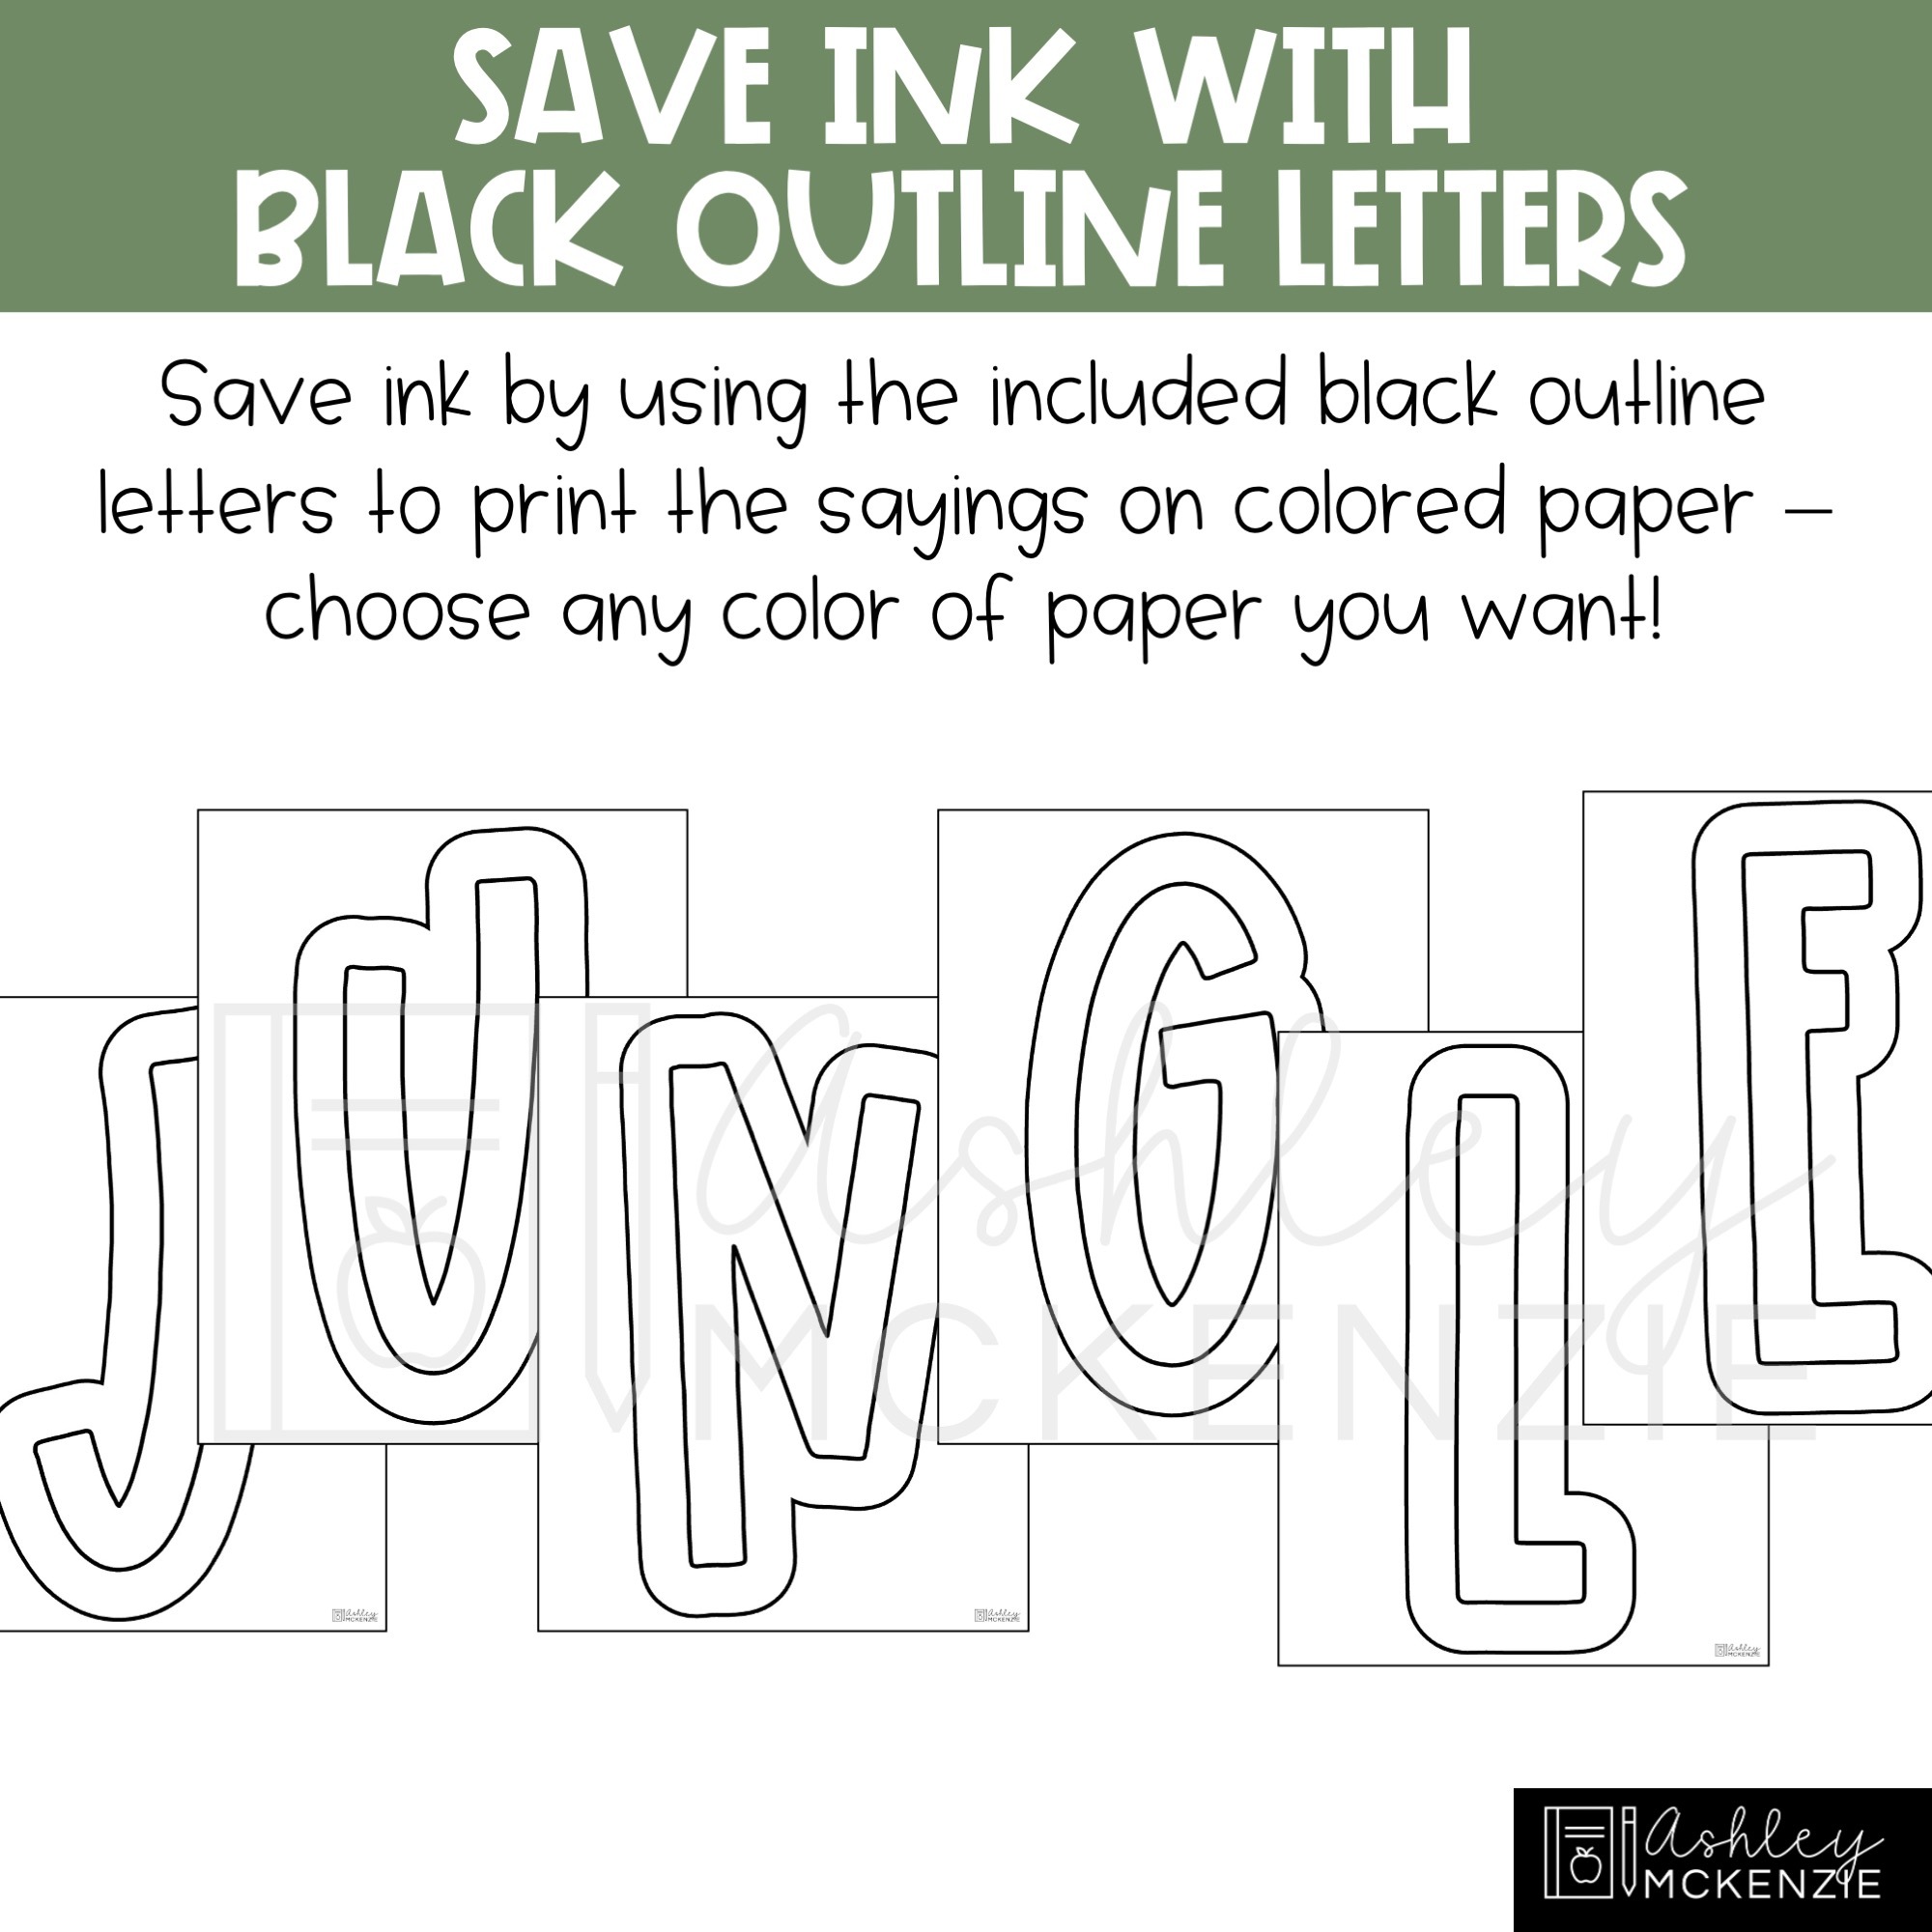 Printable Letters for Bulletin Board by Studious Shenanigans